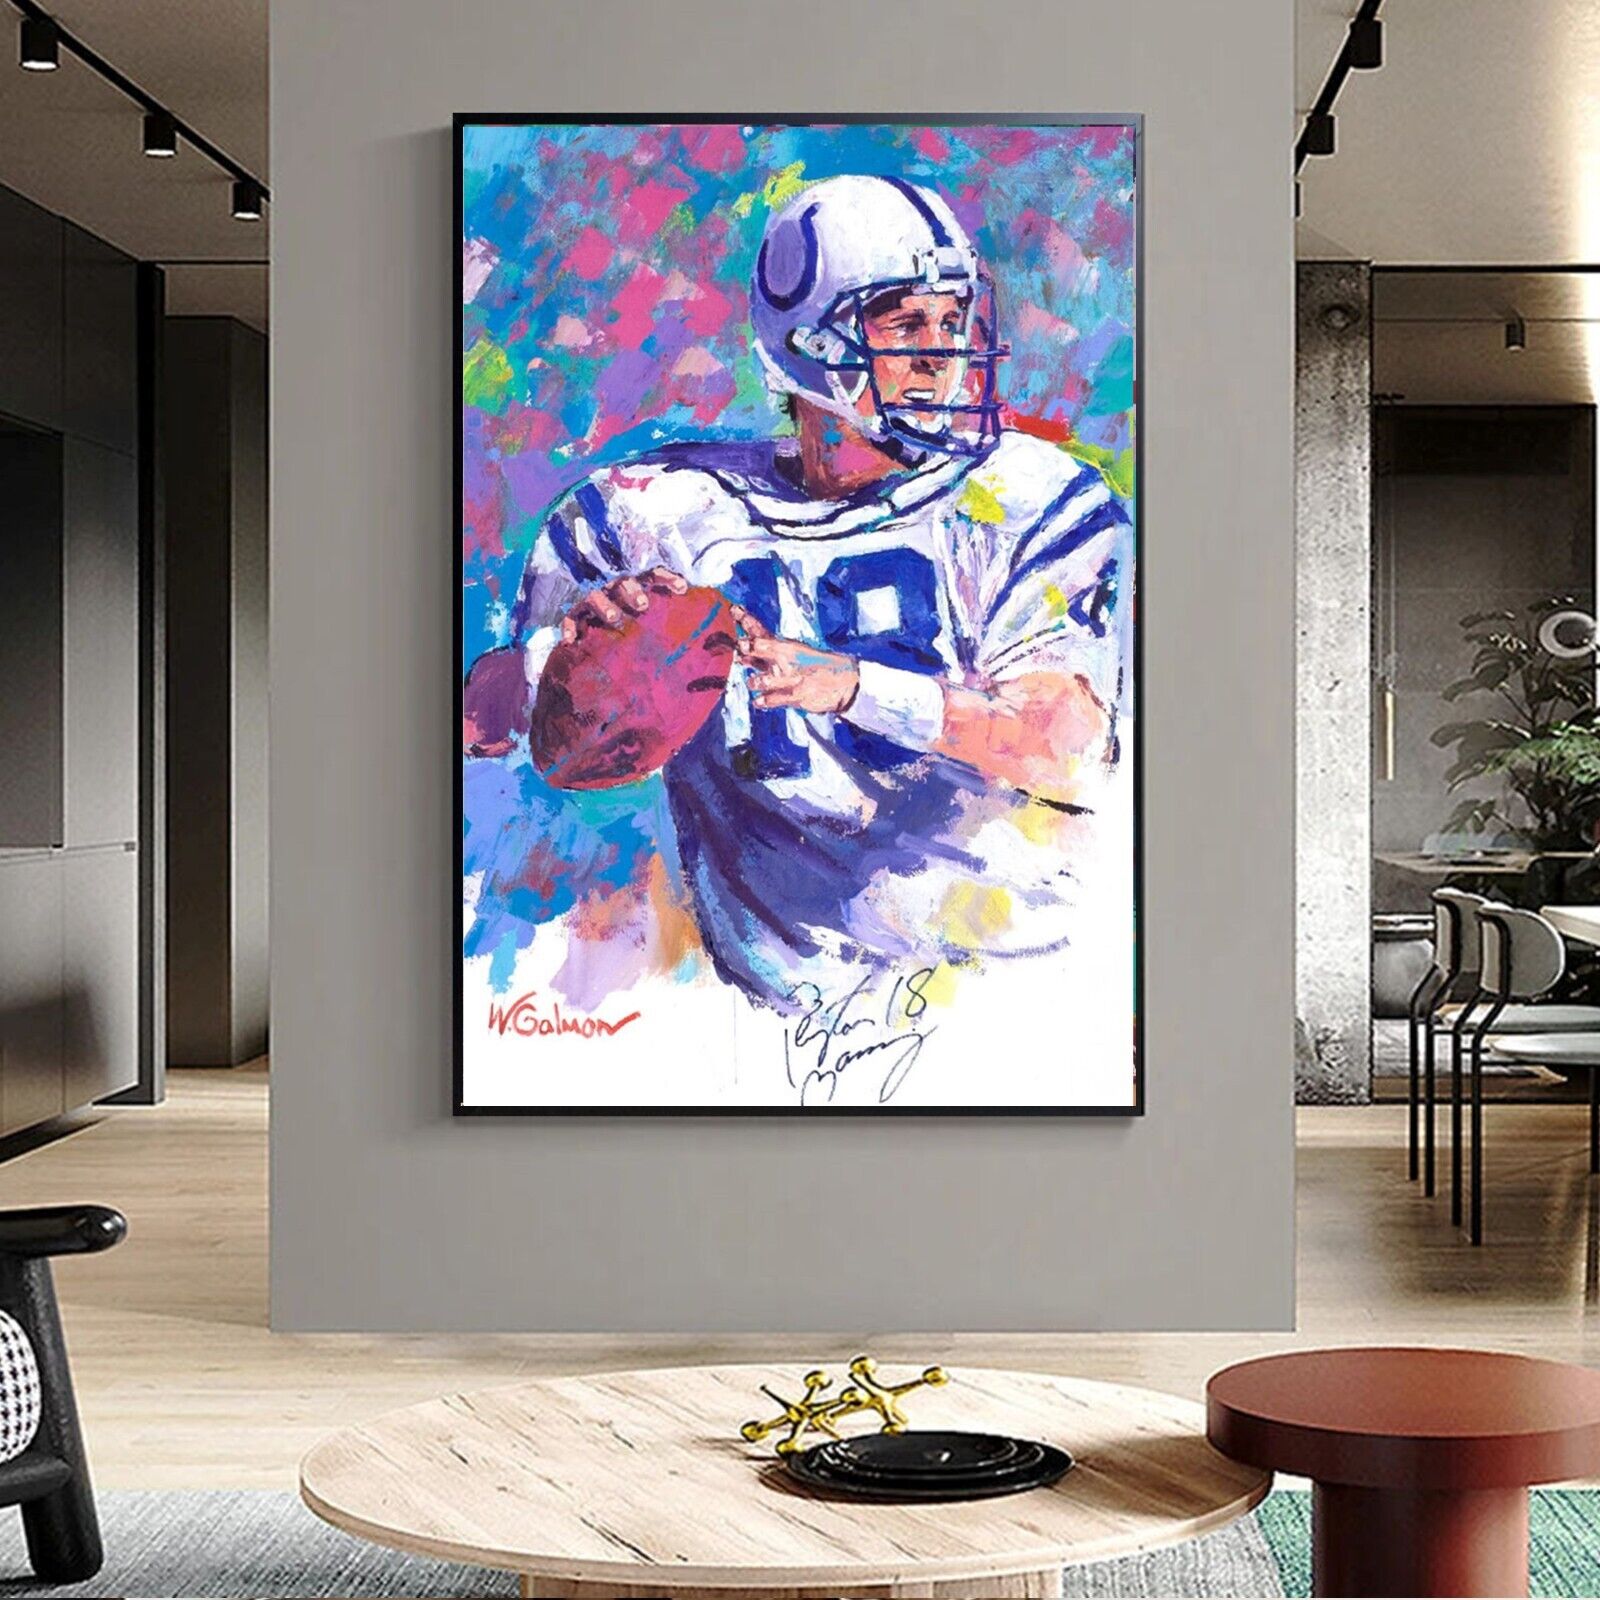 Sale Signed Payton Manning Handmade Acrylic Painting 48H X 36 Was $7K Now $1,995